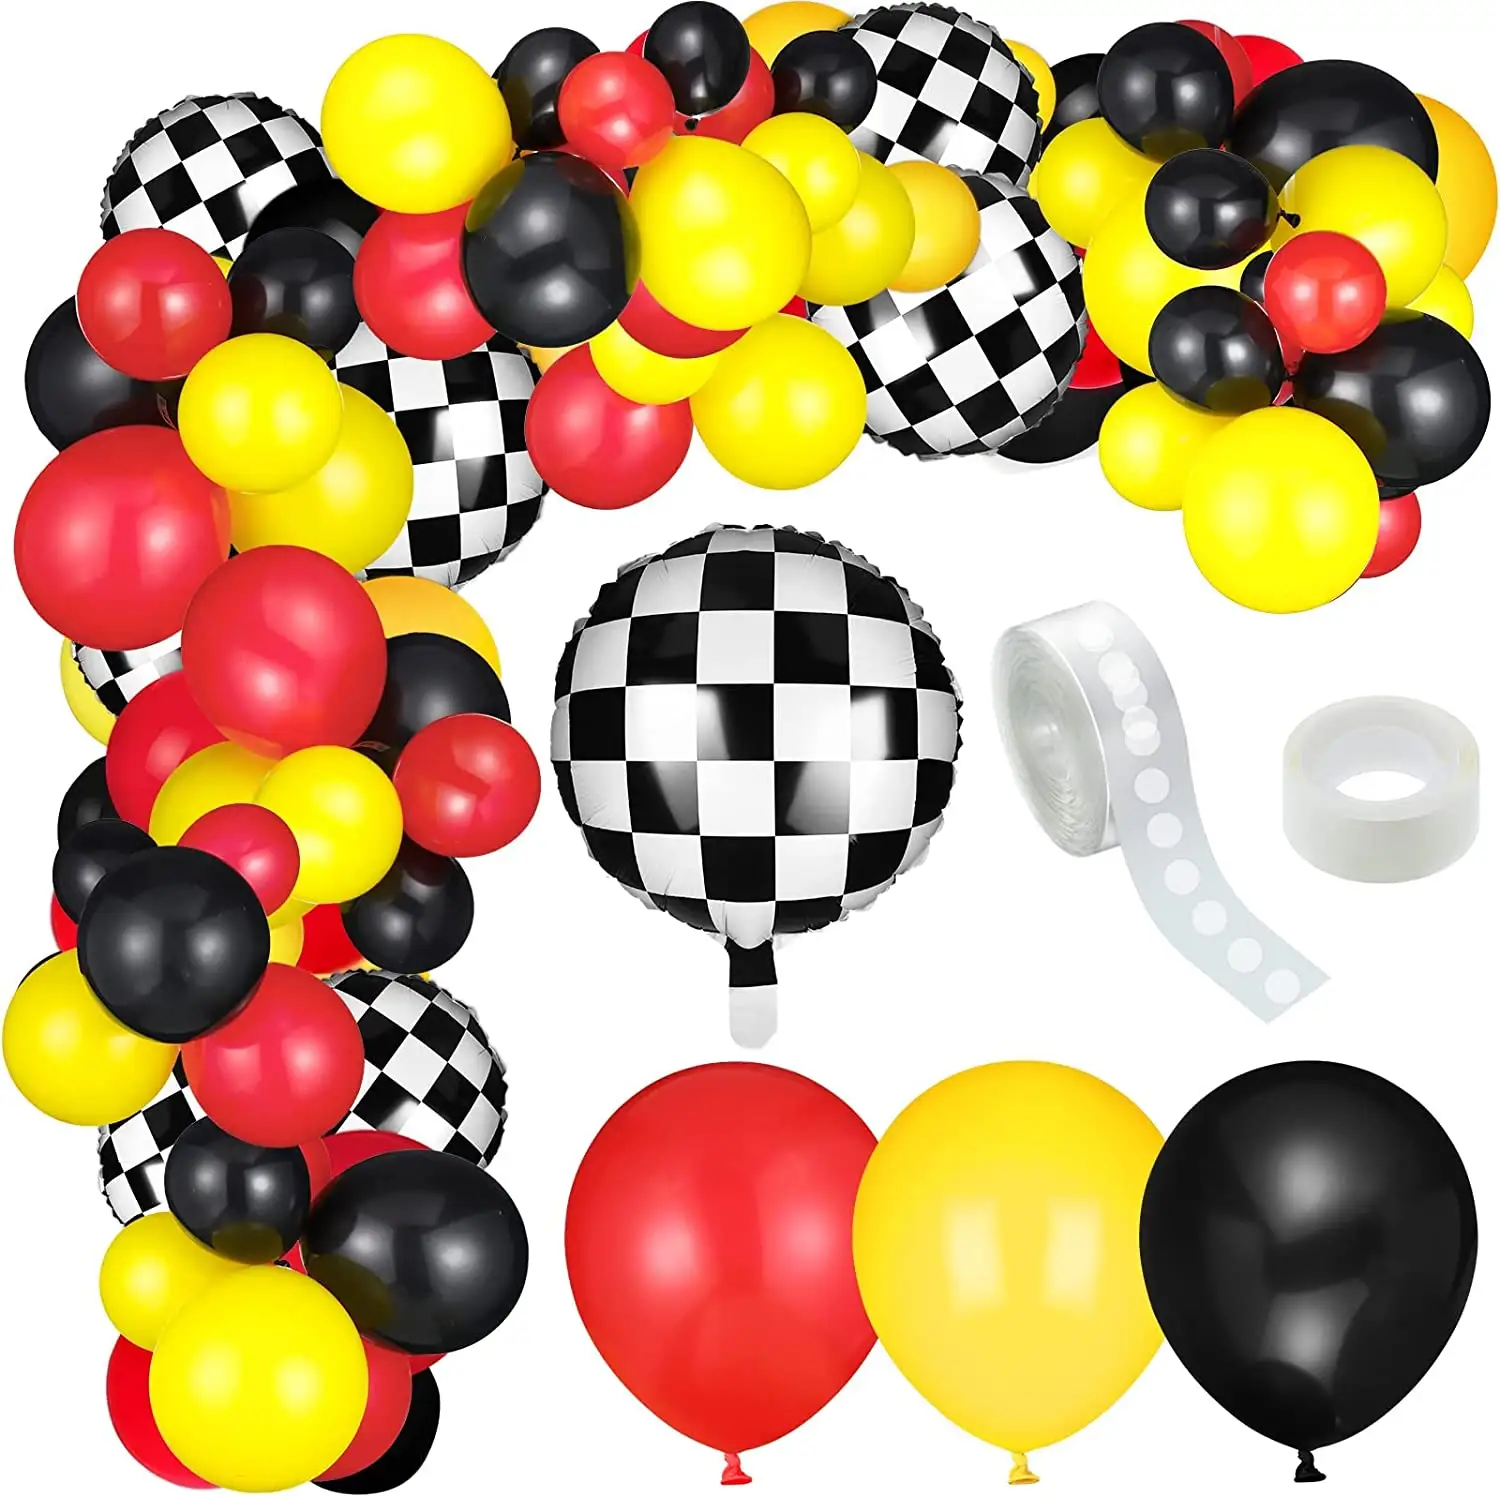 Car Race Balloons Party Supplies Race Car Theme Birthday Party Garland Arch Party Decorations